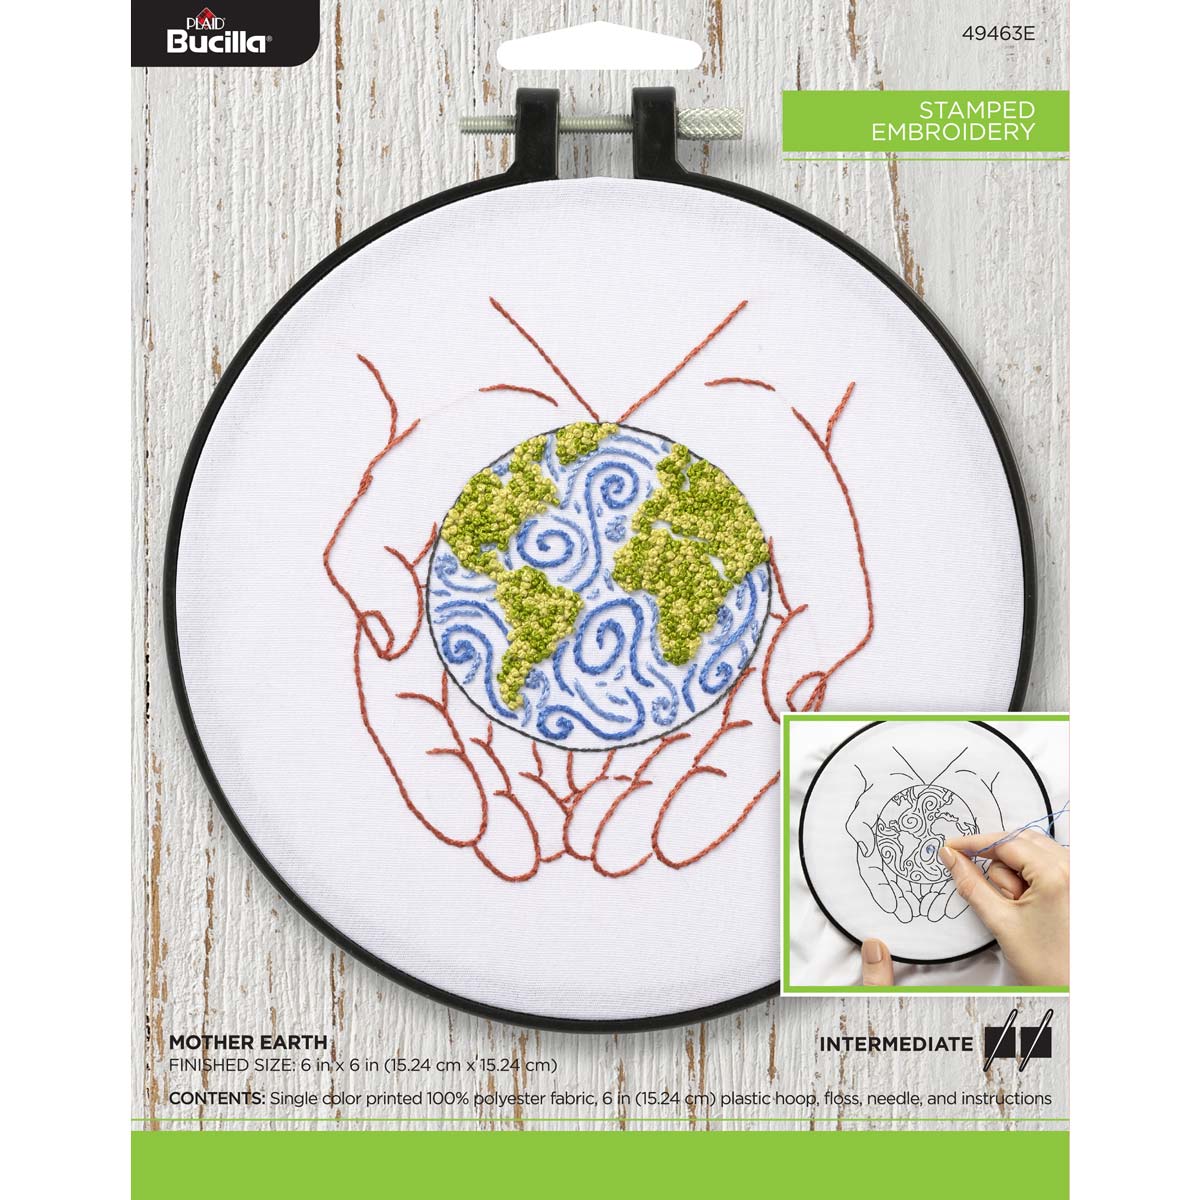 Bucilla ® Stamped Embroidery - Mother Earth - 49463E